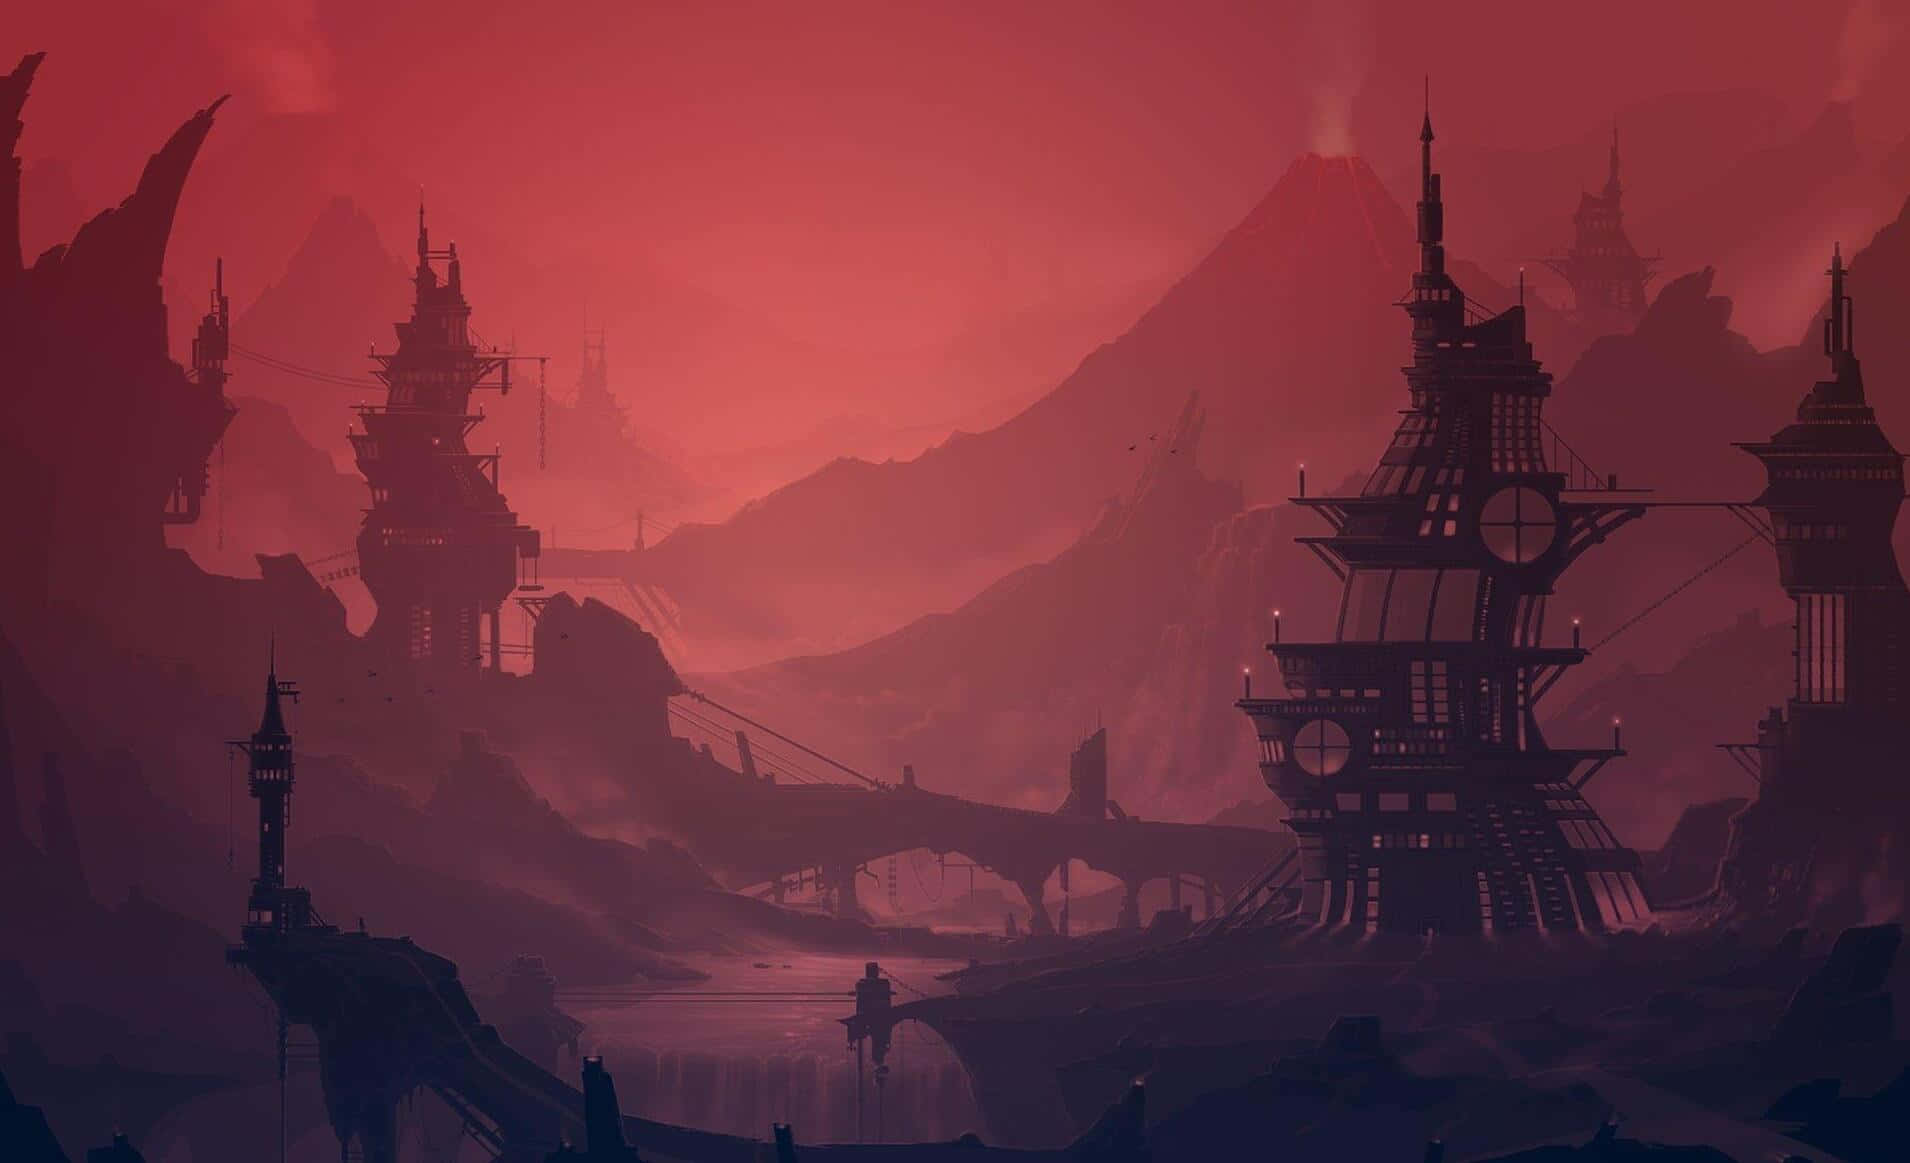 A Fantasy City With A Red Sky And A Castle